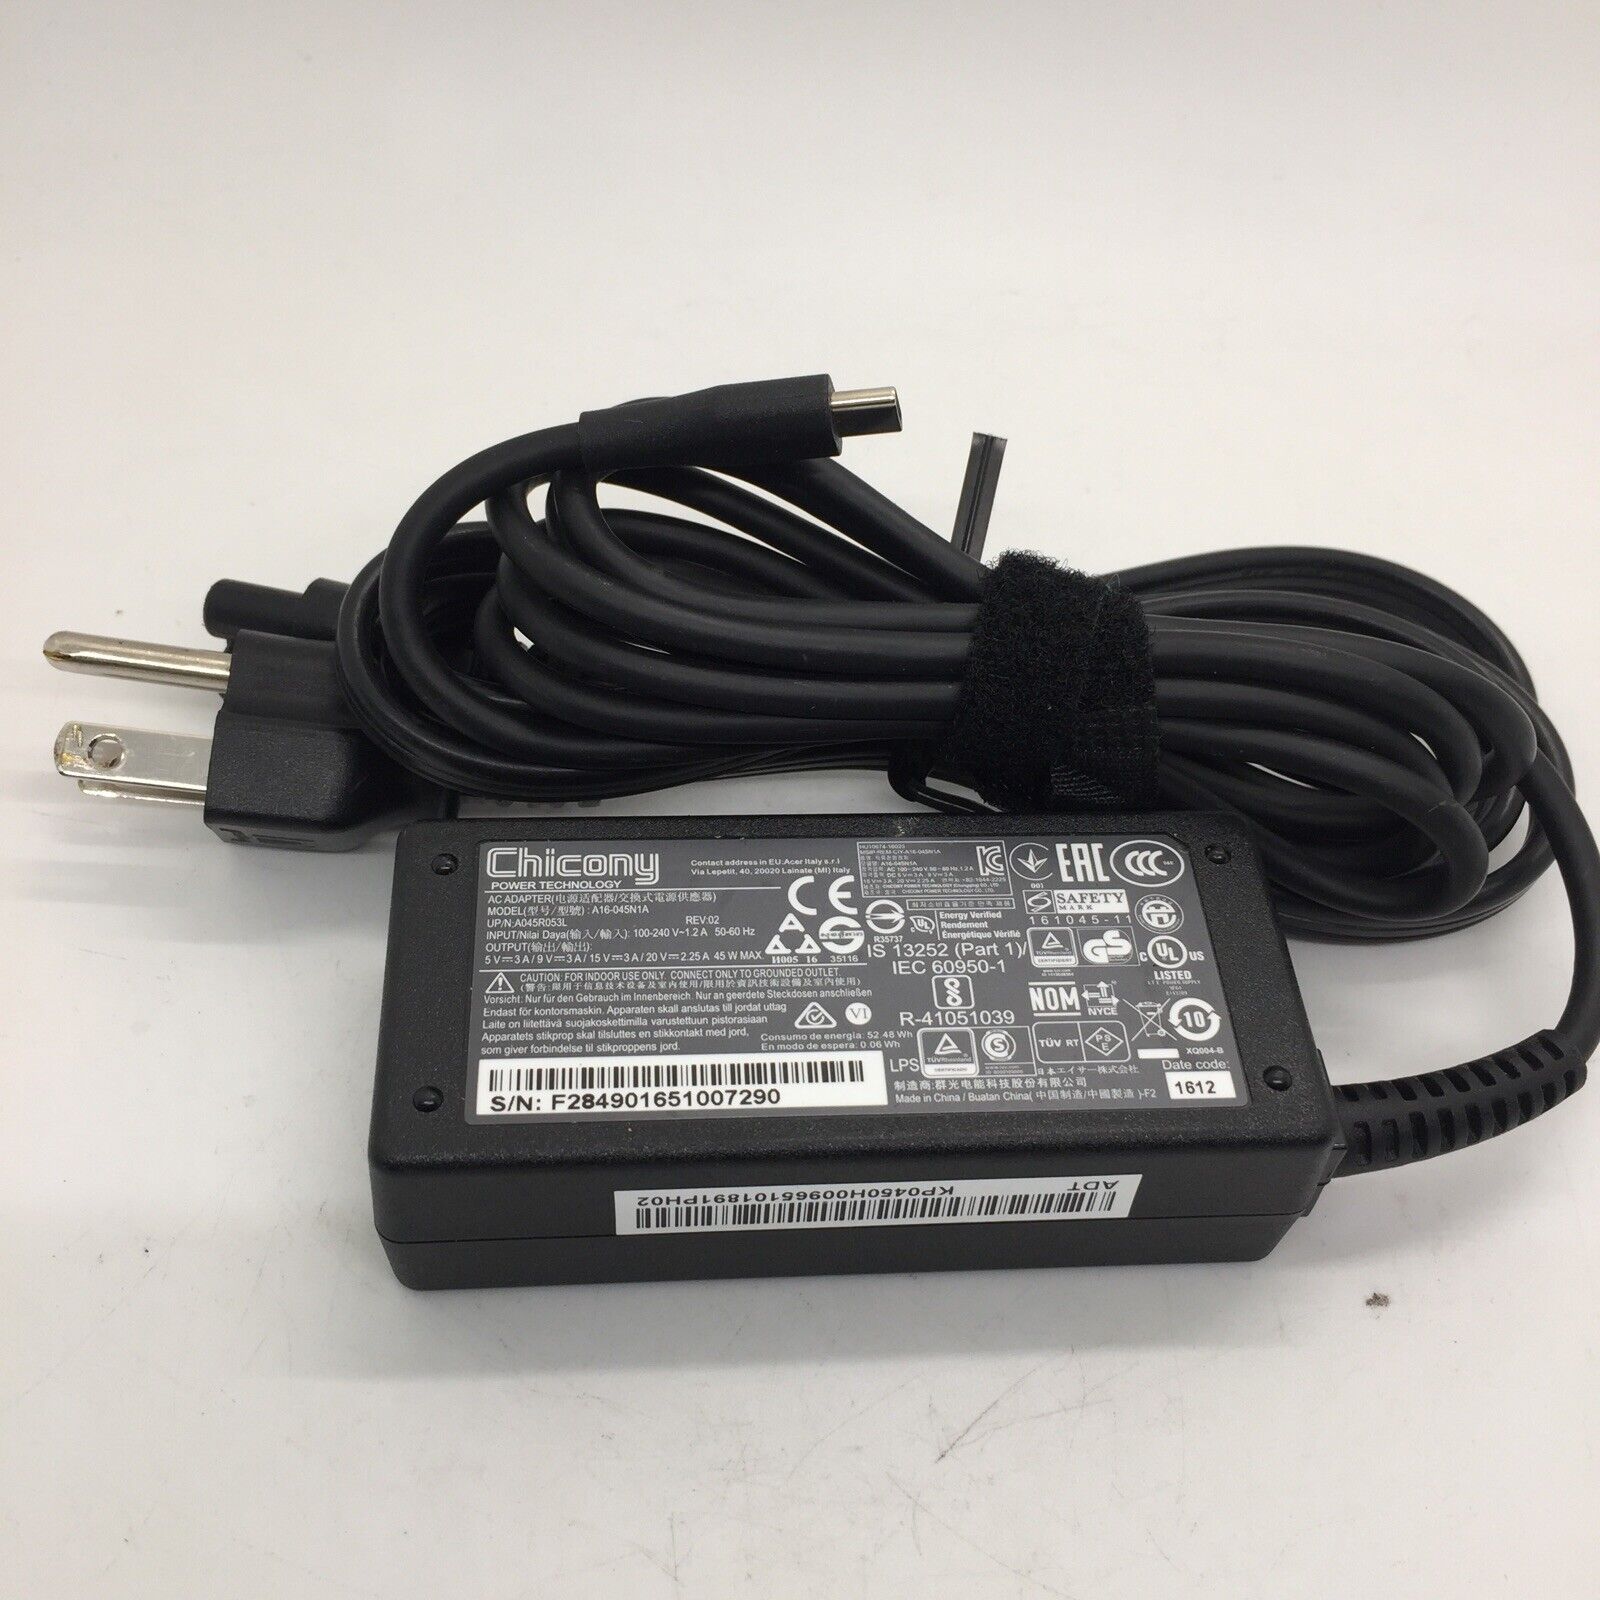 *Brand NEW*Original Chicony Chromebook A16-045N1A 45W USB-C AC Power Adapter Charger